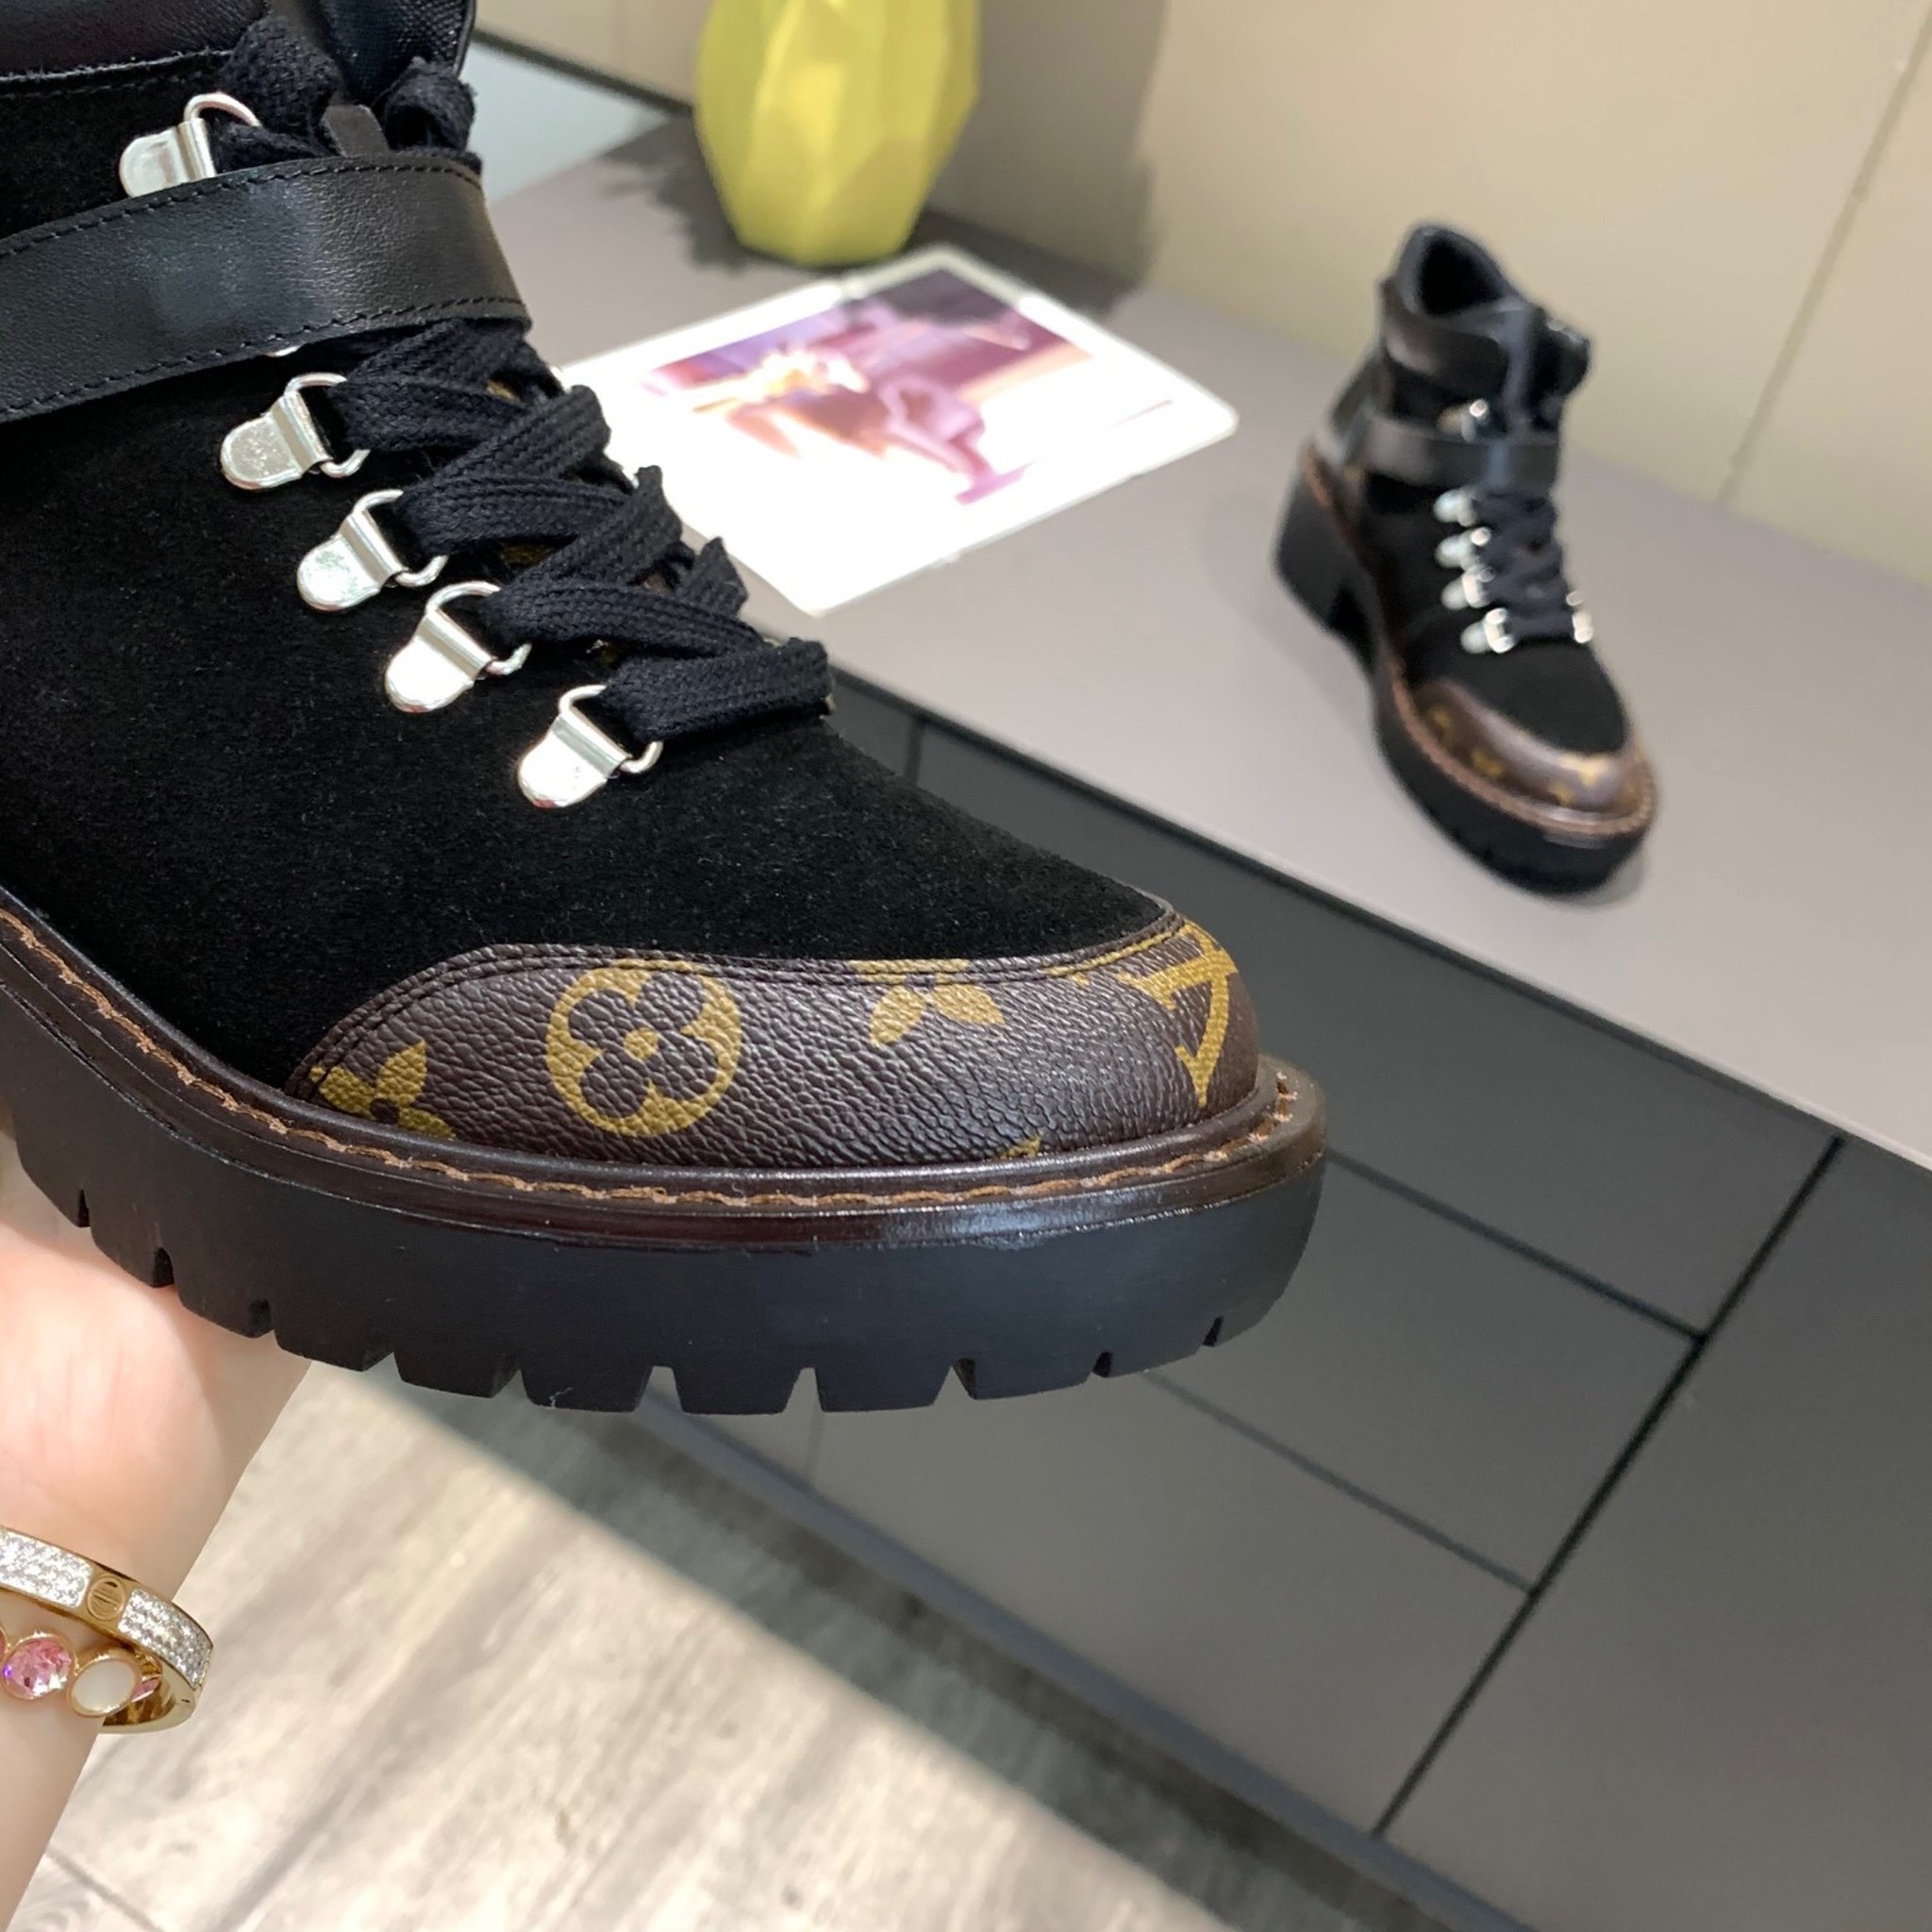 Custommade Louis Vuitton Doc Marten boots for Sale in Brooklyn NY   OfferUp